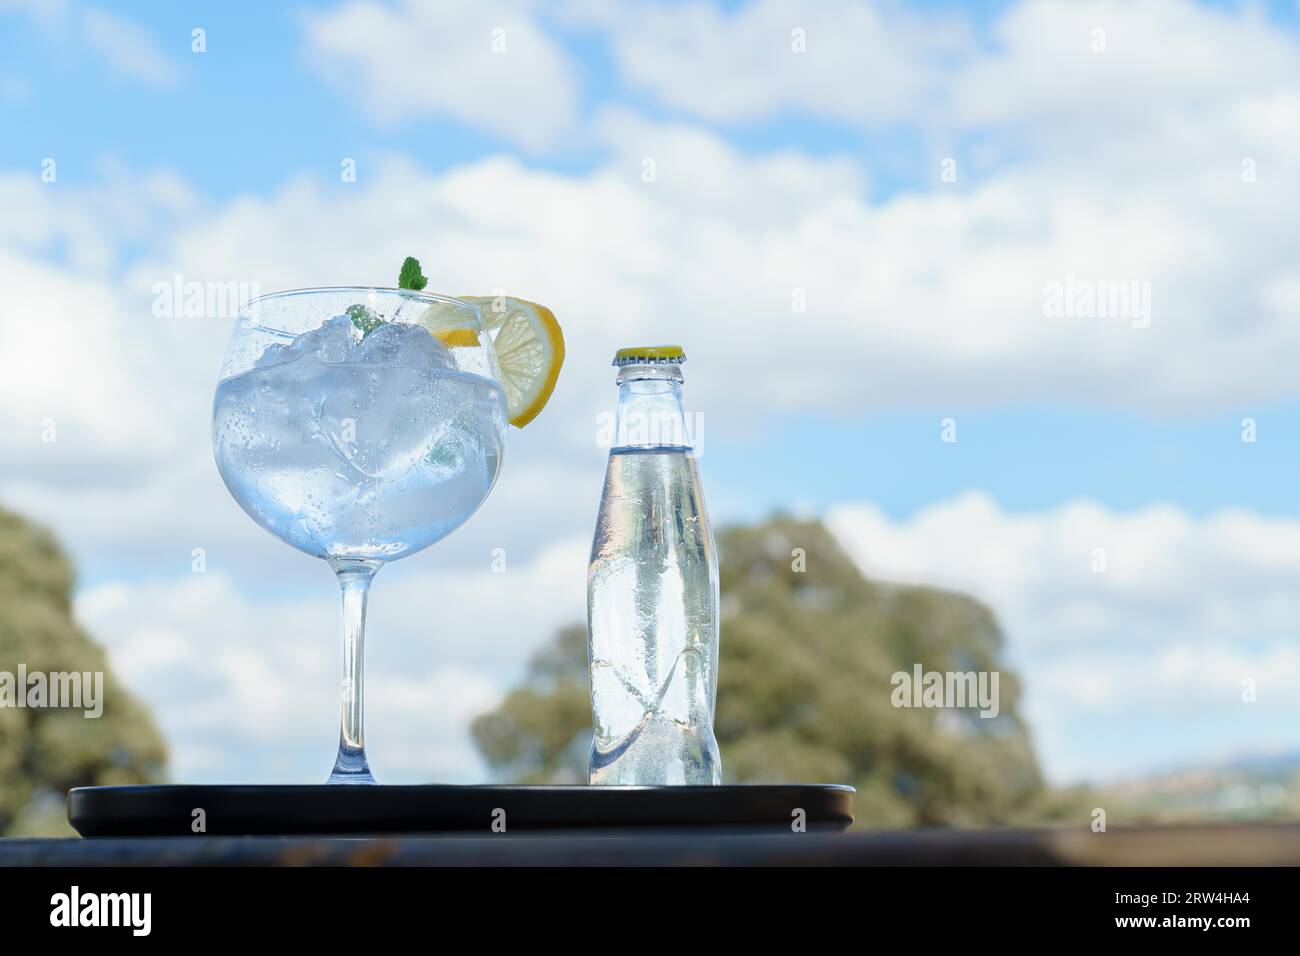 Bottle of tonic with a glass with ice on a black tray and landscape with trees and clouds in the sky out of focus in the background Stock Photo